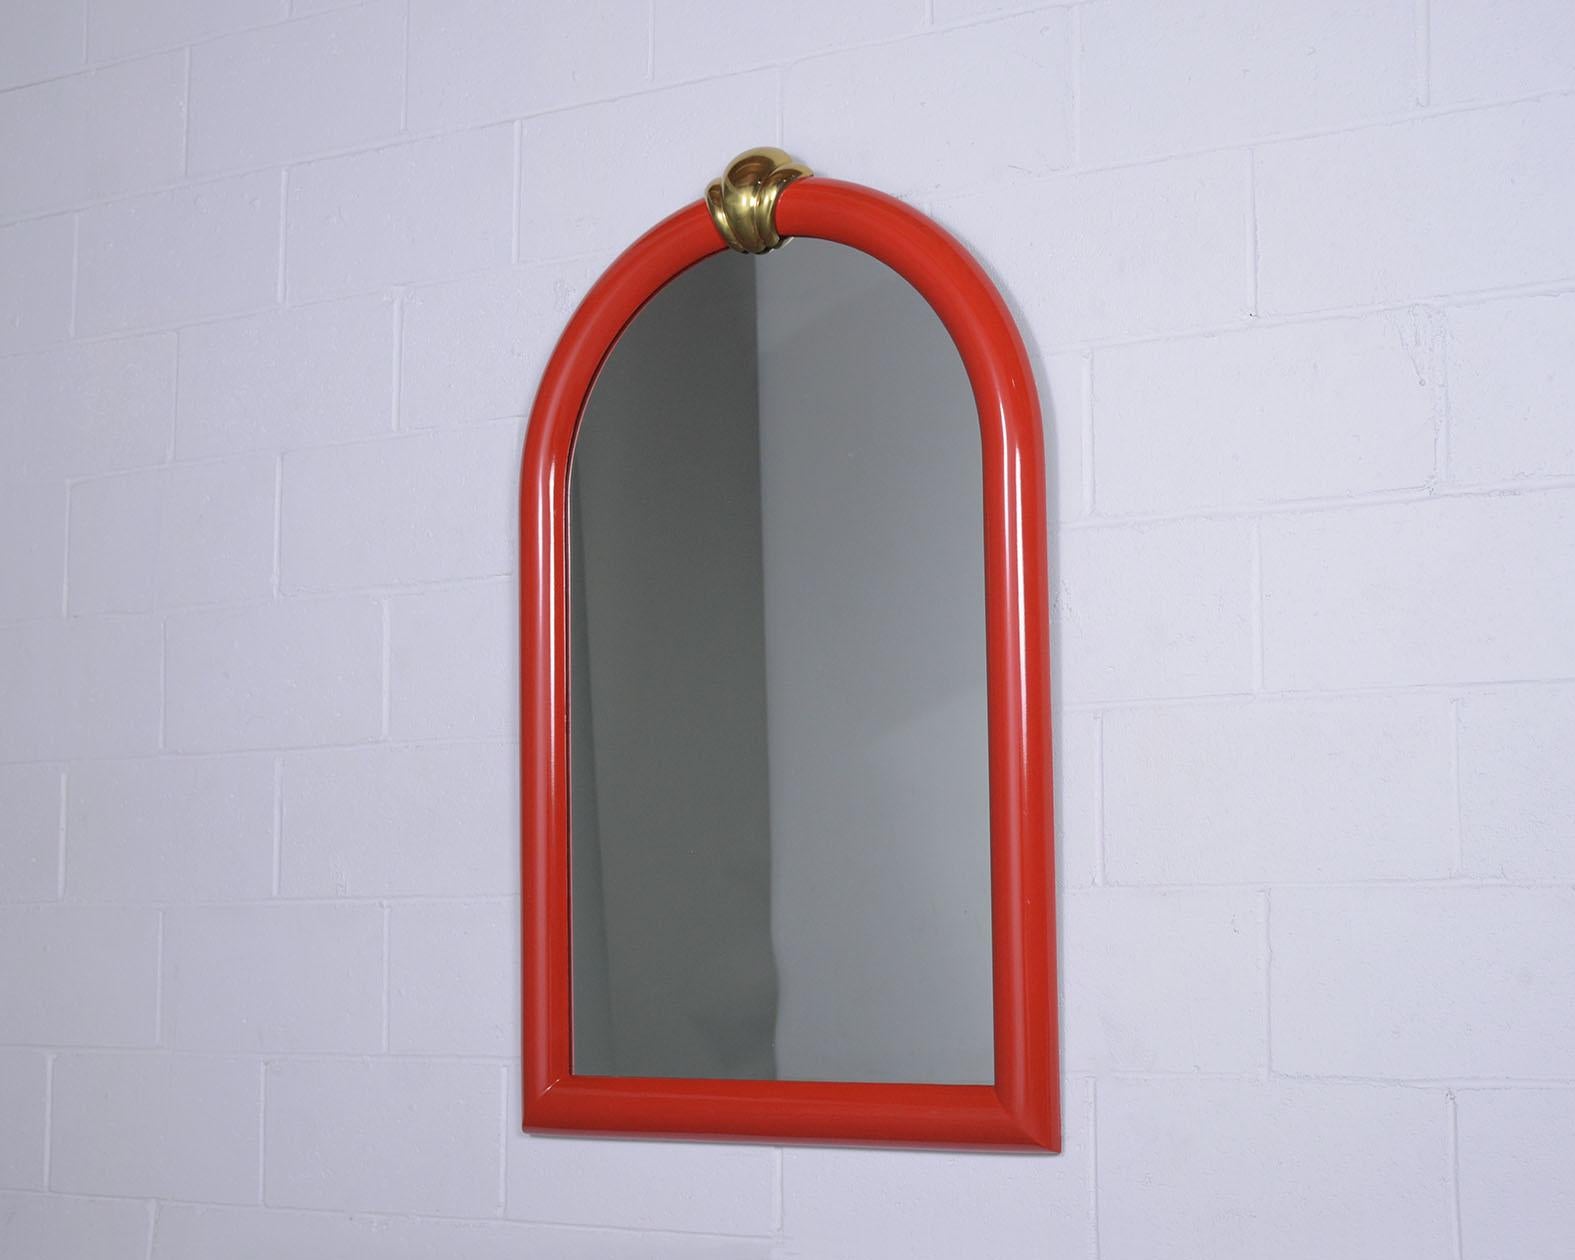 An extraordinary vintage wall mirror is made out of wood and has been completely restored by our team of expert craftsmen. The mirror features a deep red color with a lacquered finished 4' height frame arched design with the elegant solid shell